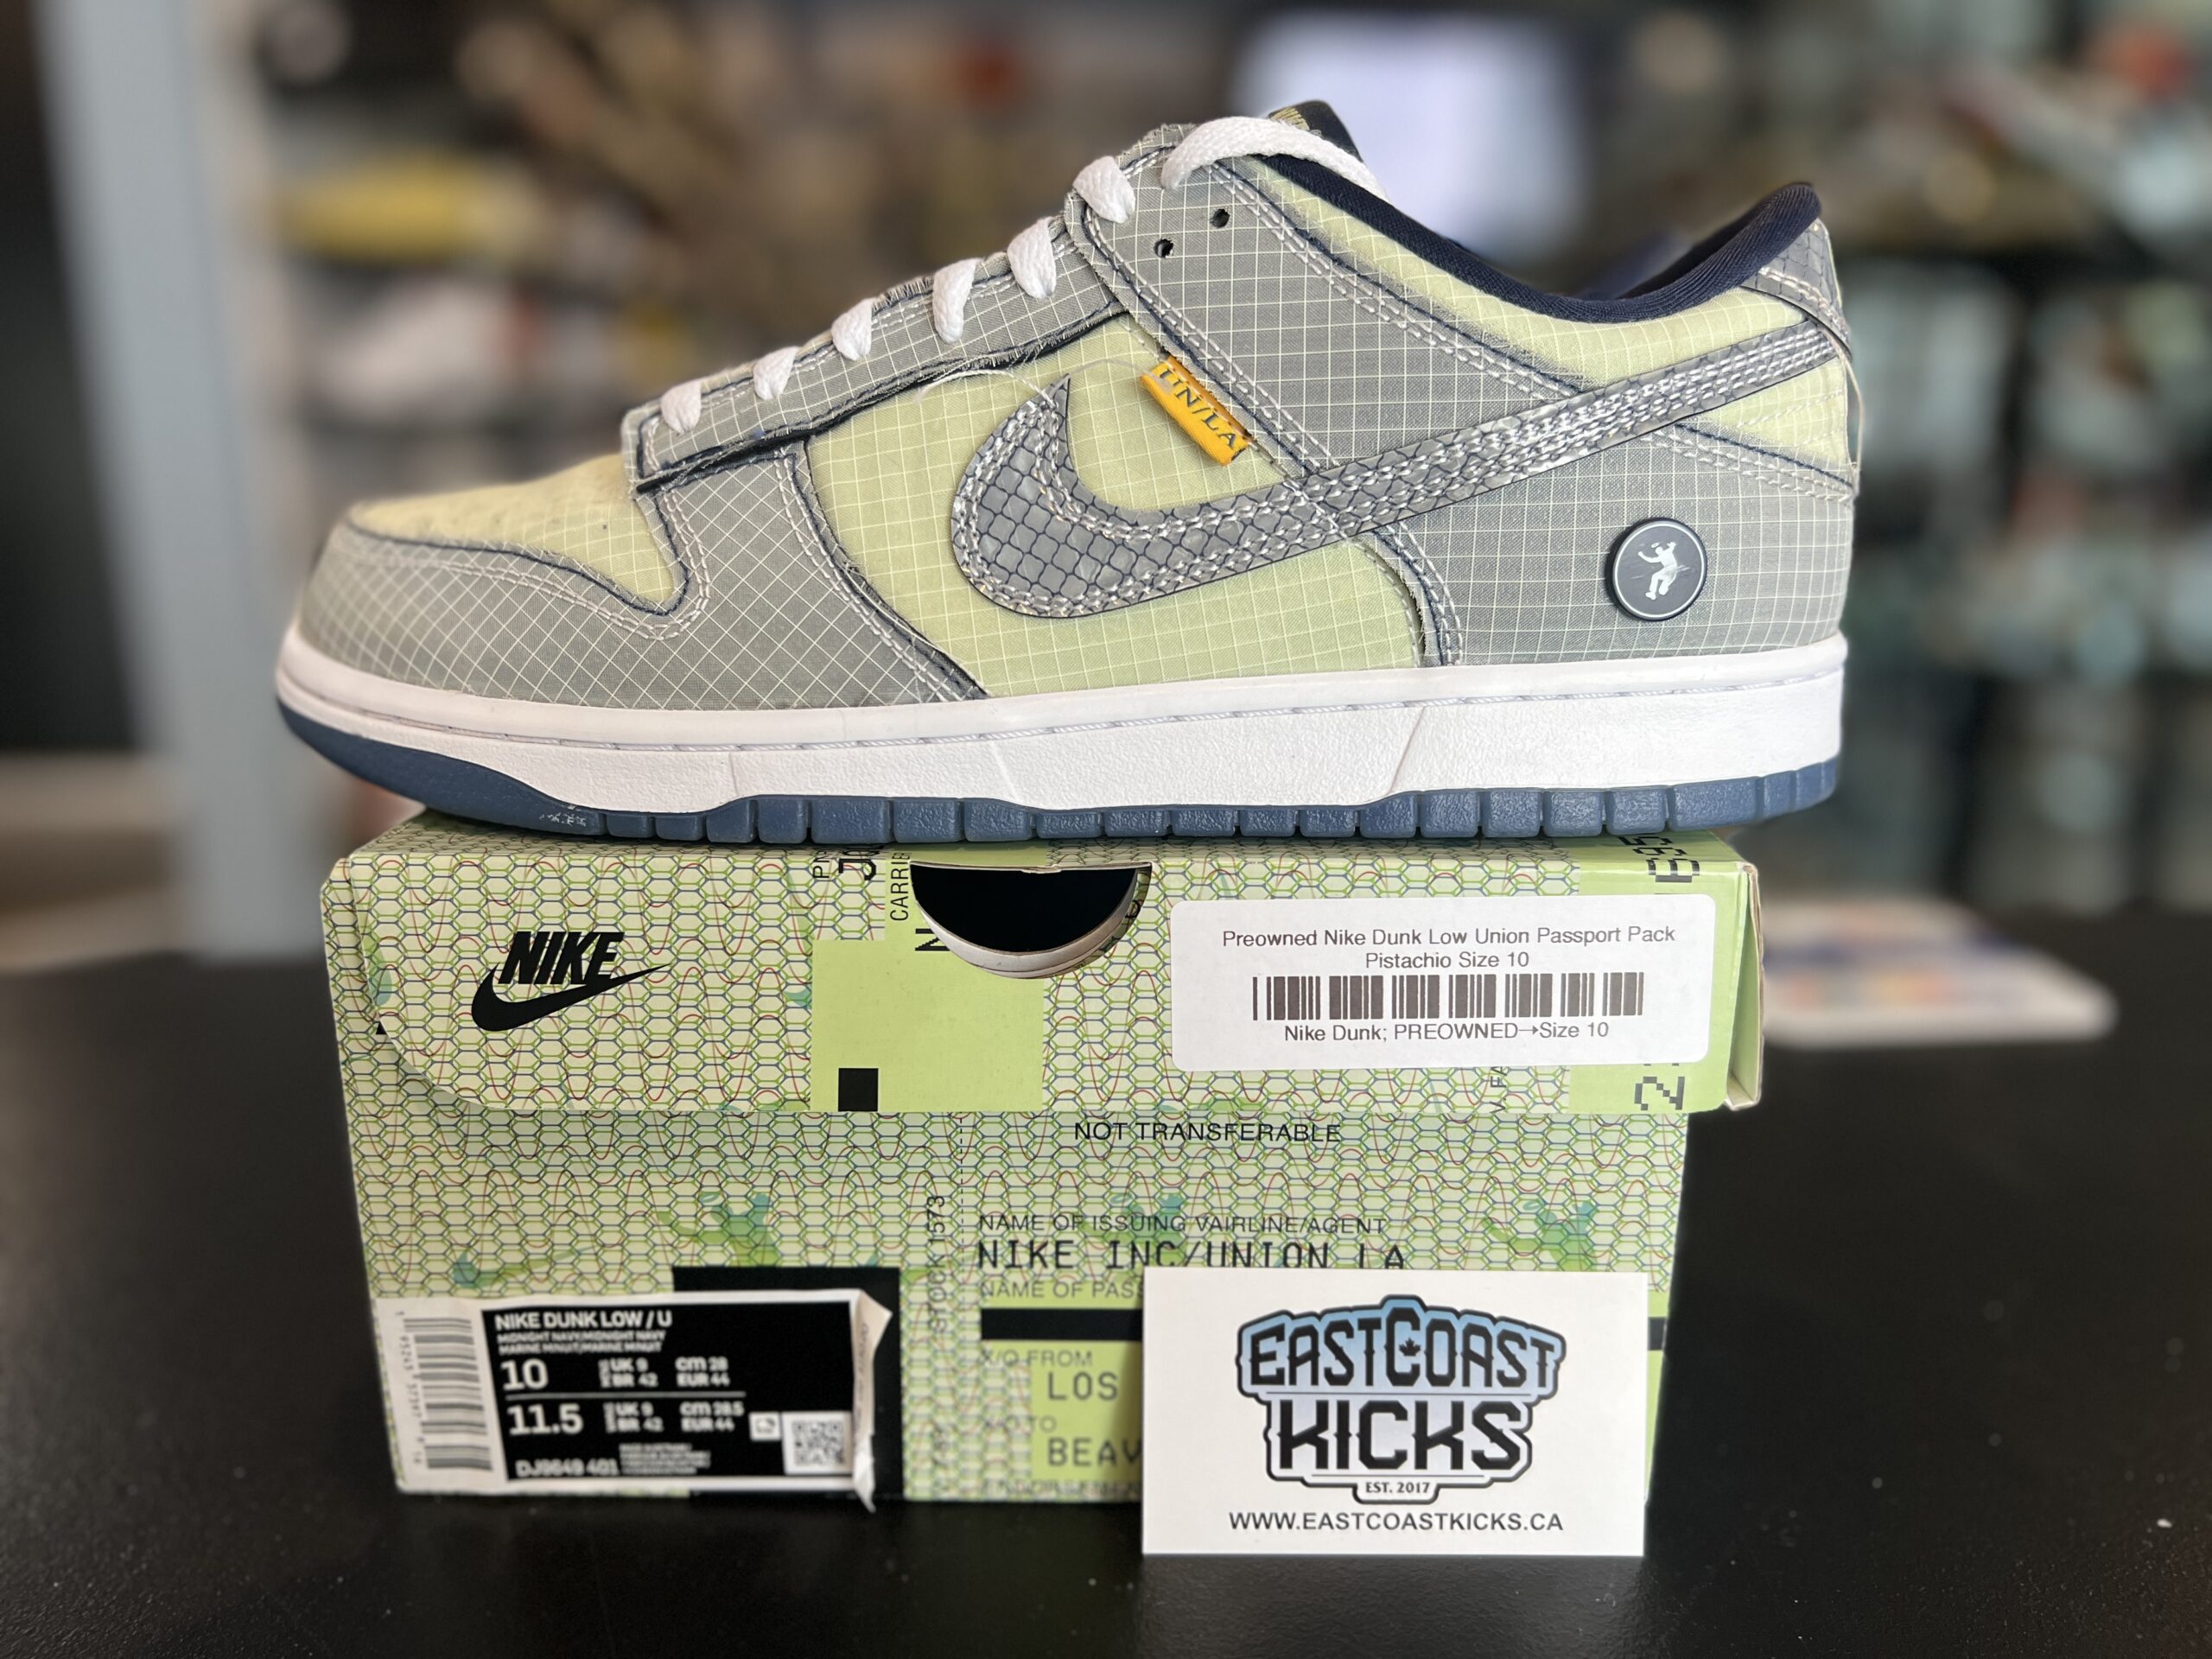 Preowned Nike Dunk Low Union Passport Pack Pistachio Size 10